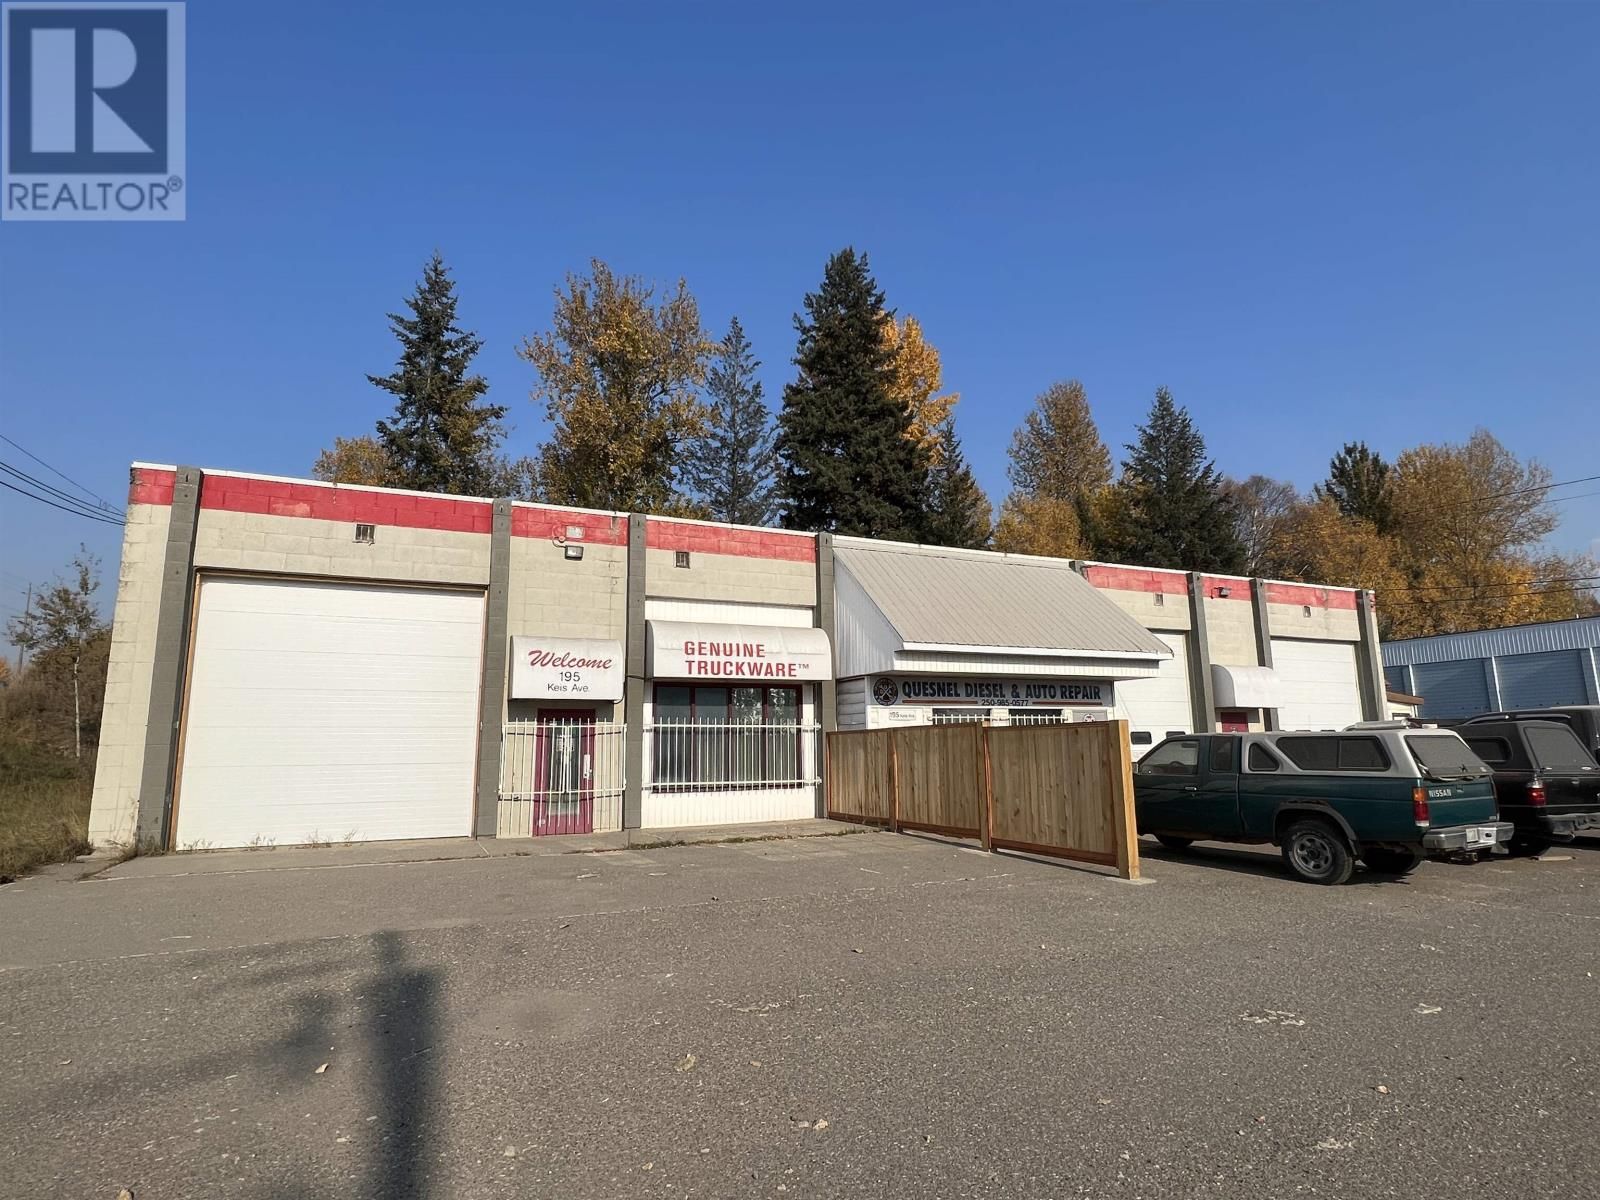 Main Photo: 195 KEIS AVENUE in Quesnel: Retail for sale : MLS®# C8047284